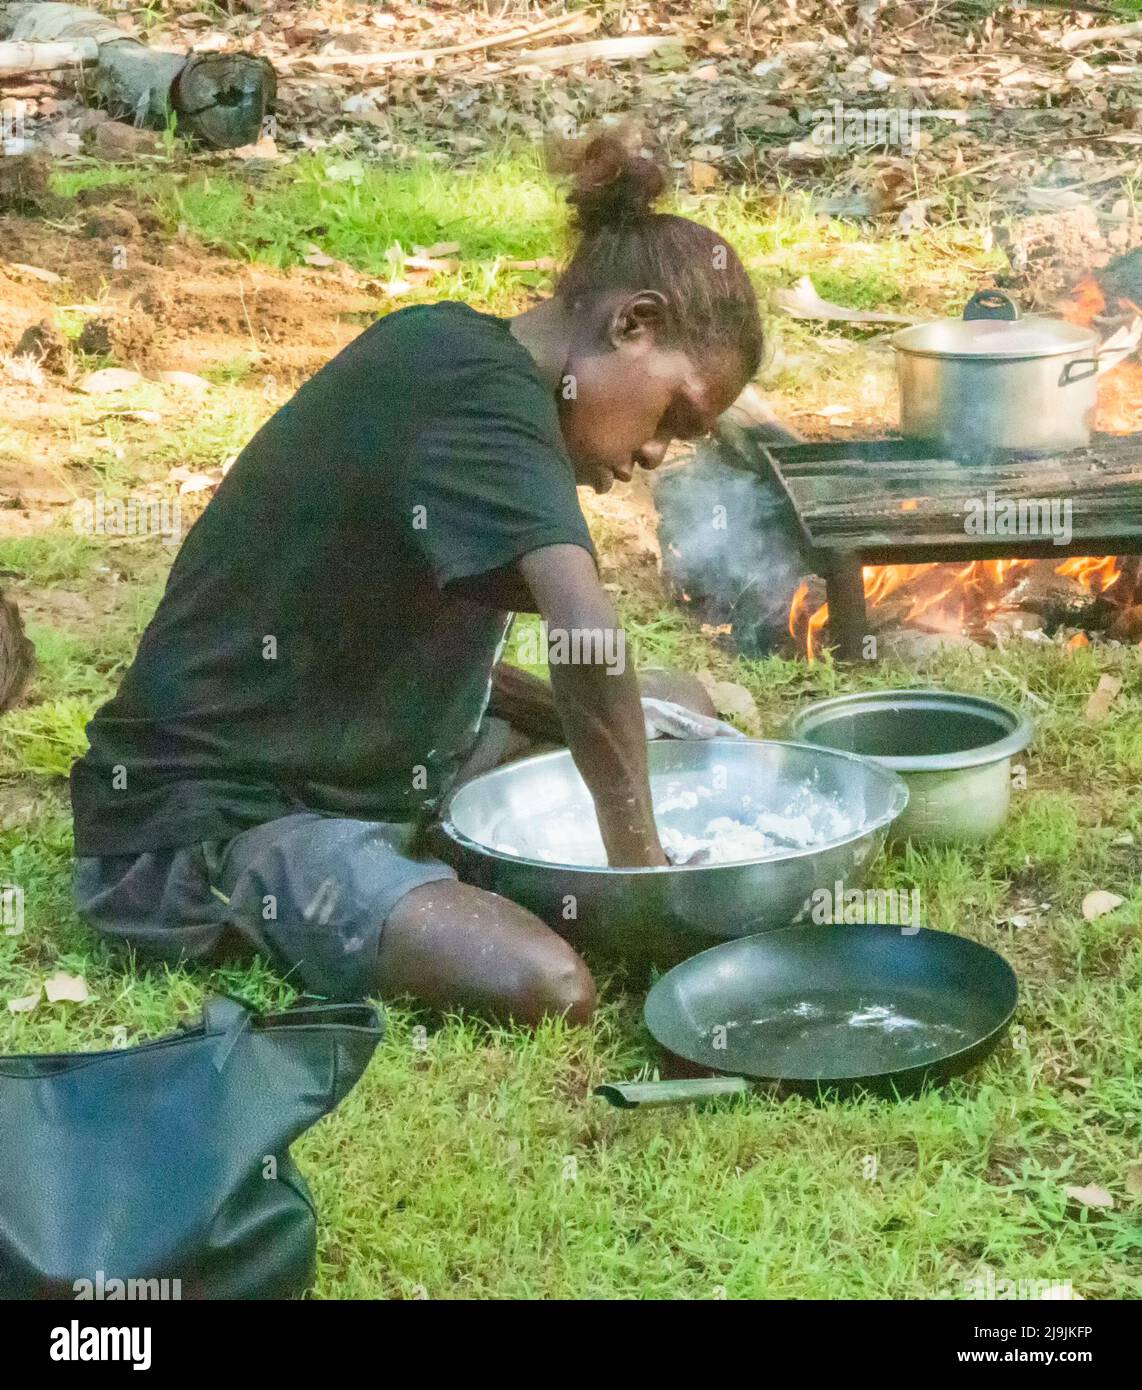 Young Aboriginal woman preparing food during cooking classes at the Taste of Kakadu Festival, Cooinda, Kakadu National Park, Northern Territory, NT, A Stock Photo